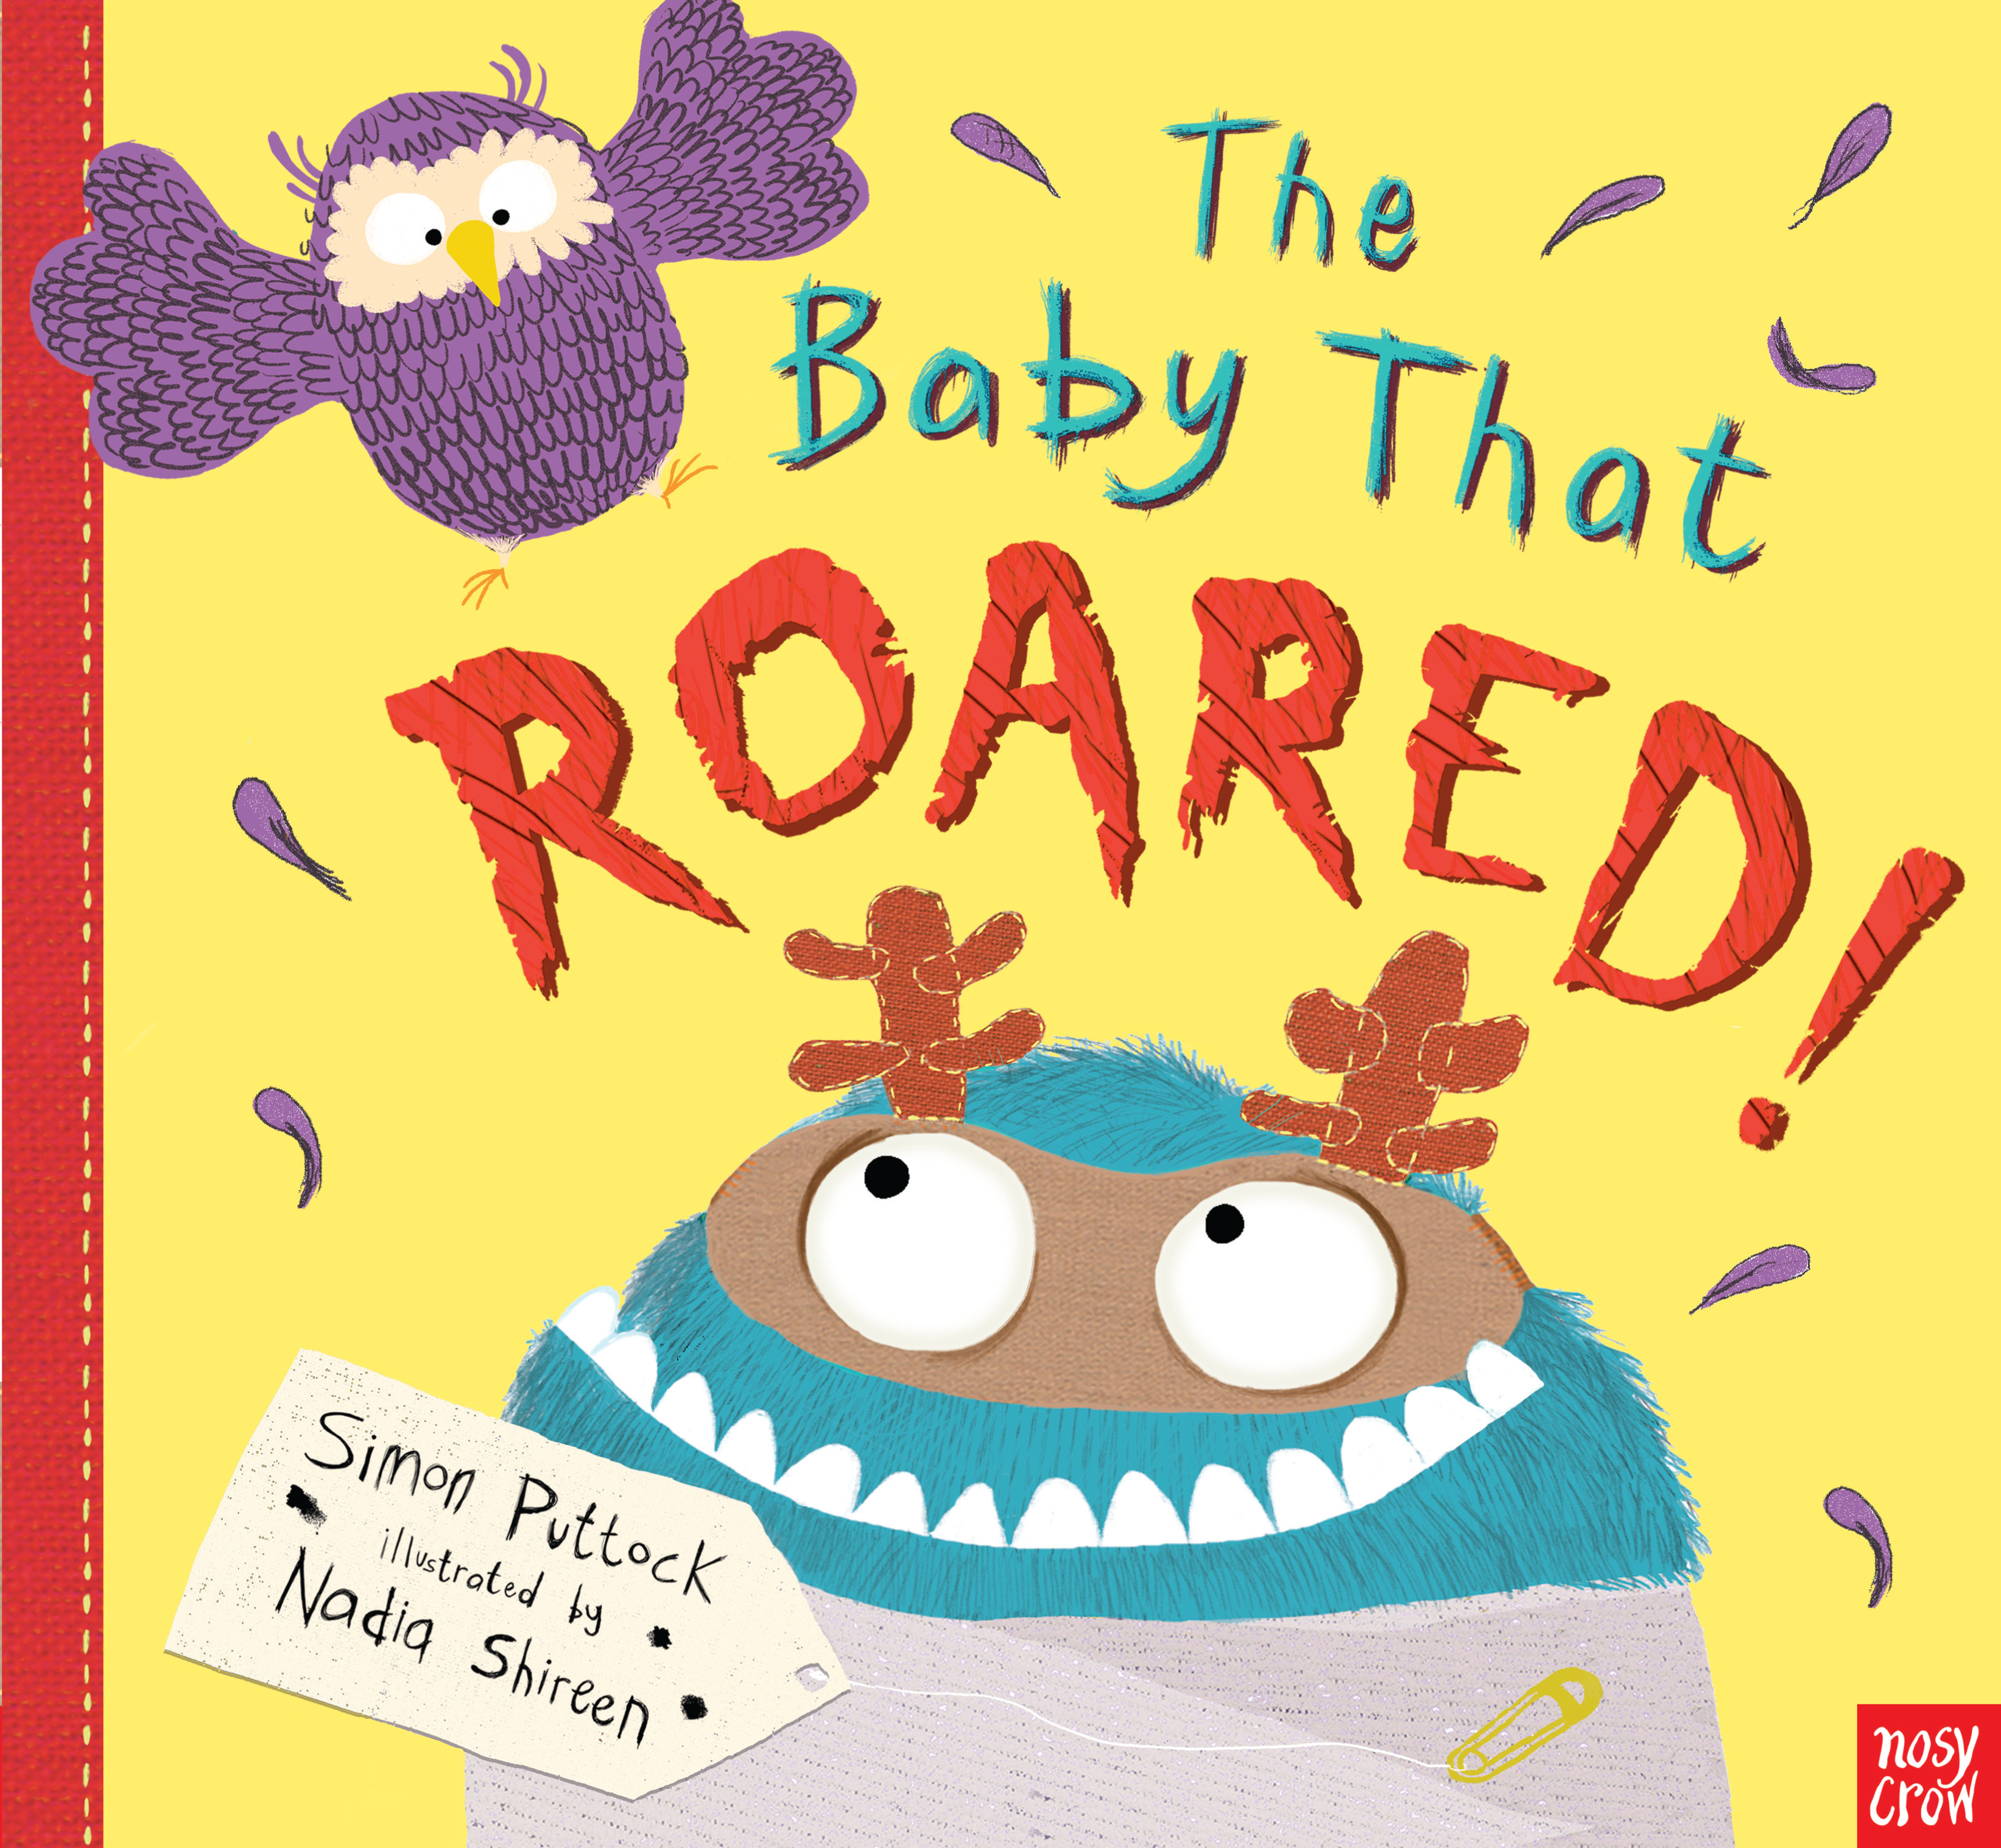 The Baby That Roared